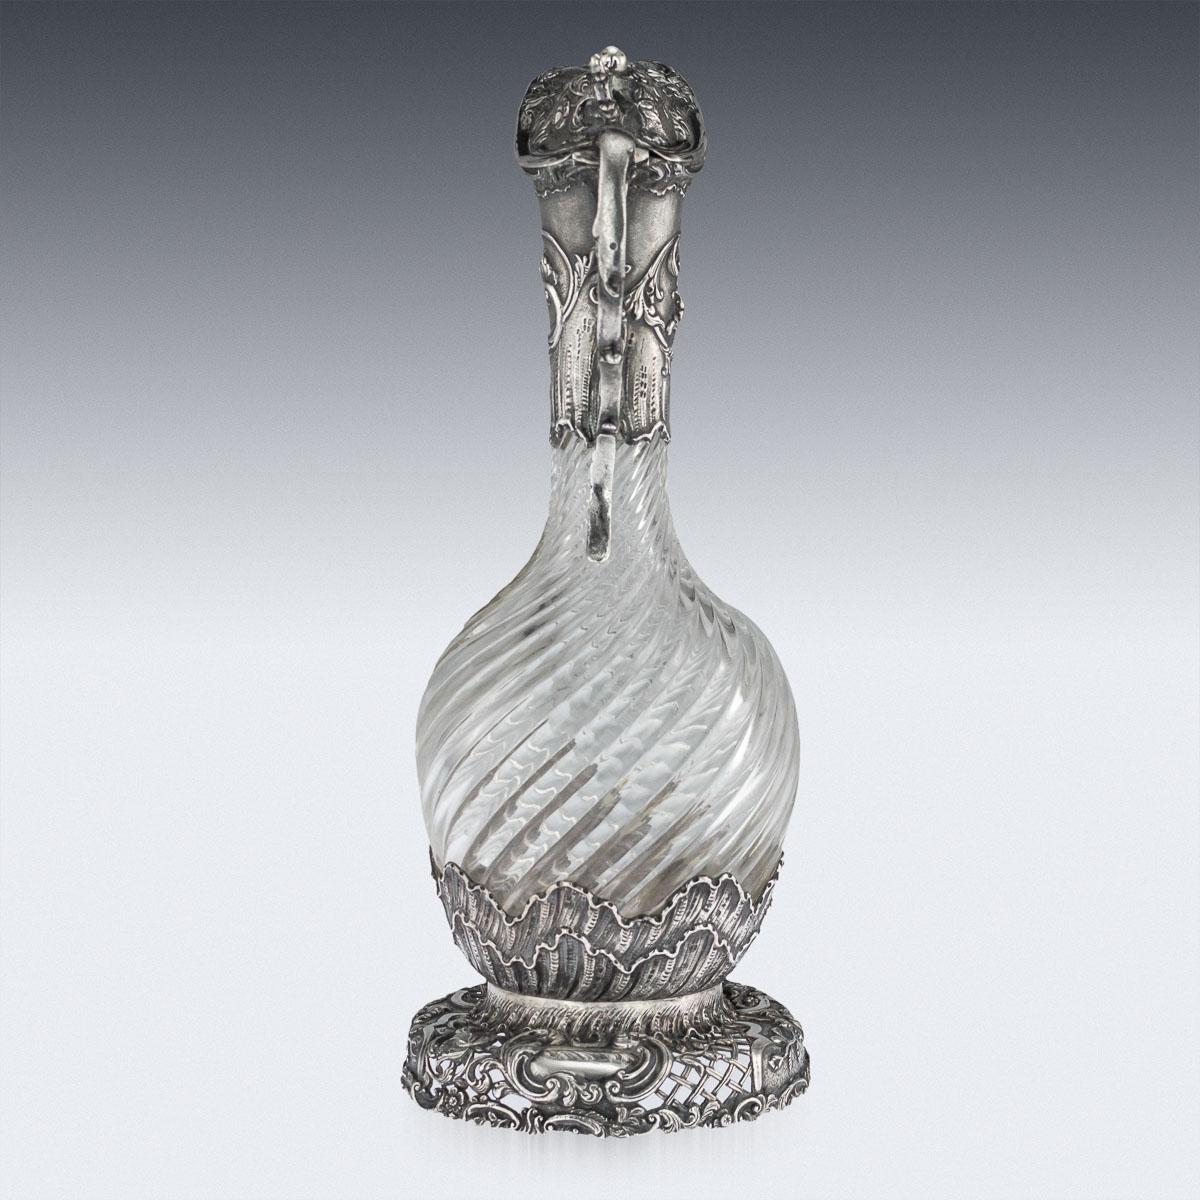 Antique 20th century Dutch solid silver mounted glass wine claret jug, swirl glass body applied with silver scrolling foliage and flowers, set with a hinged lid, applied with a thumbpiece and an elaborate scroll handle.

Hallmarked with a Dutch